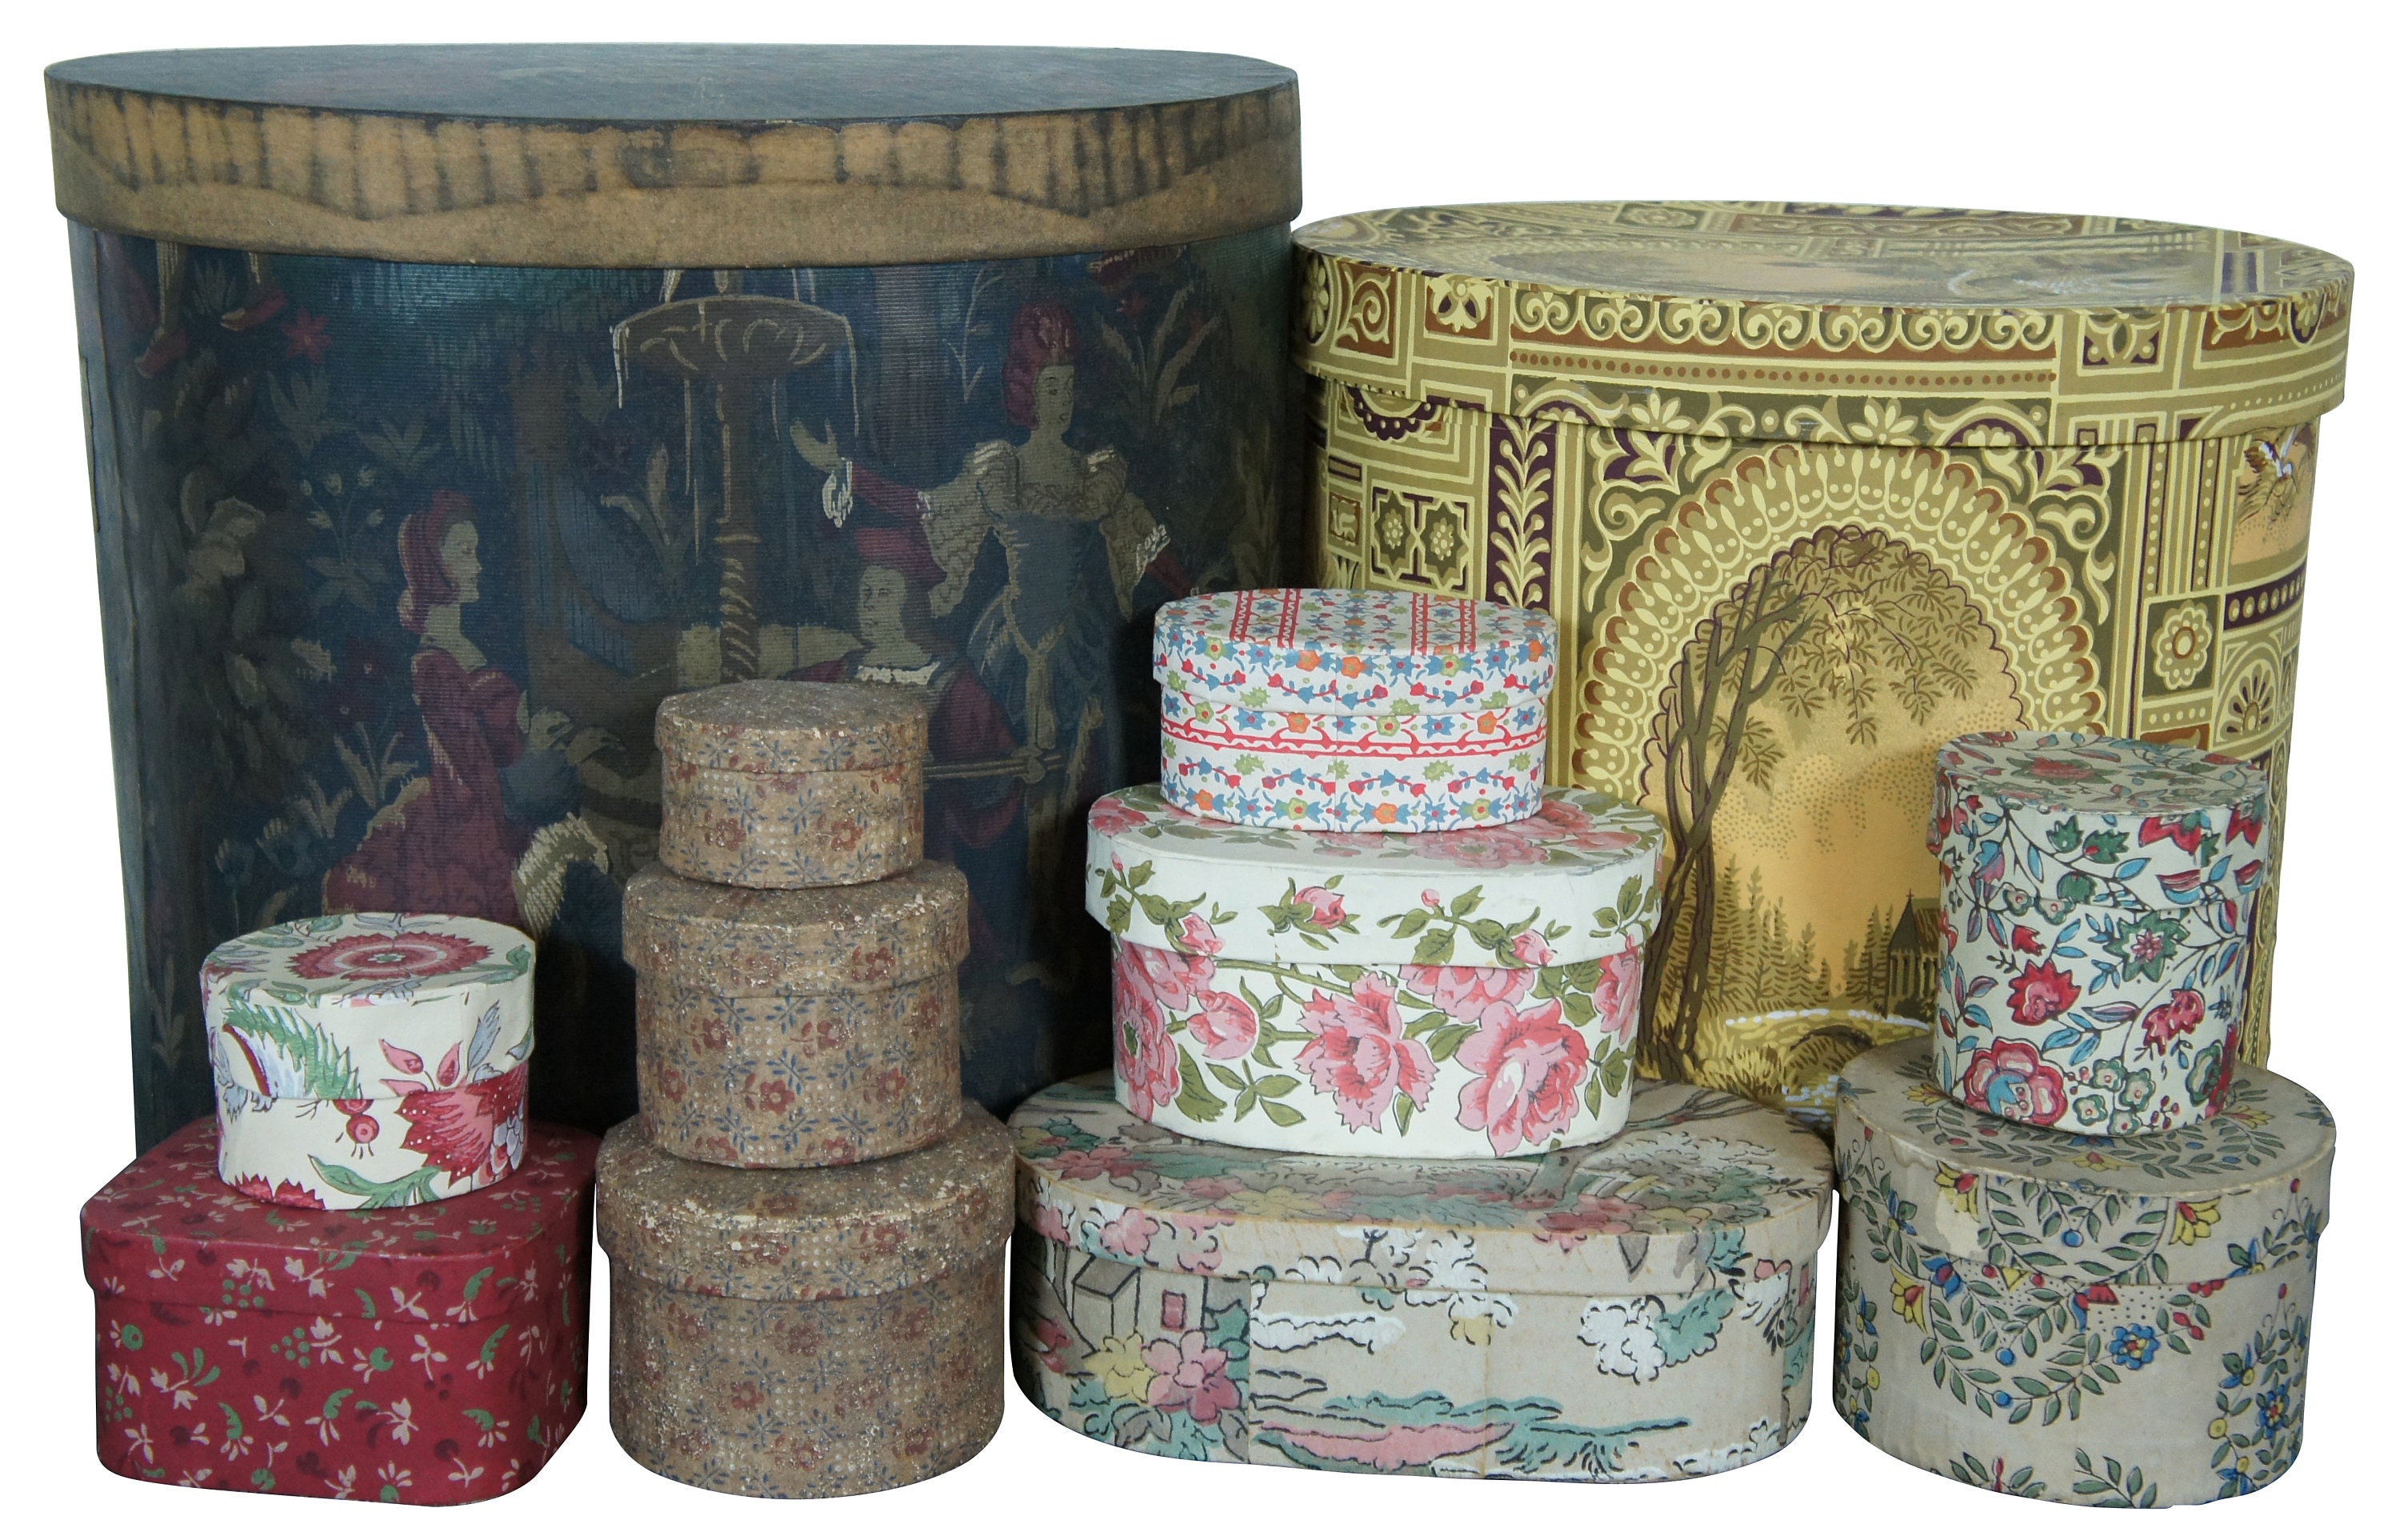 Sold at Auction: Decorative Hat Boxes And More